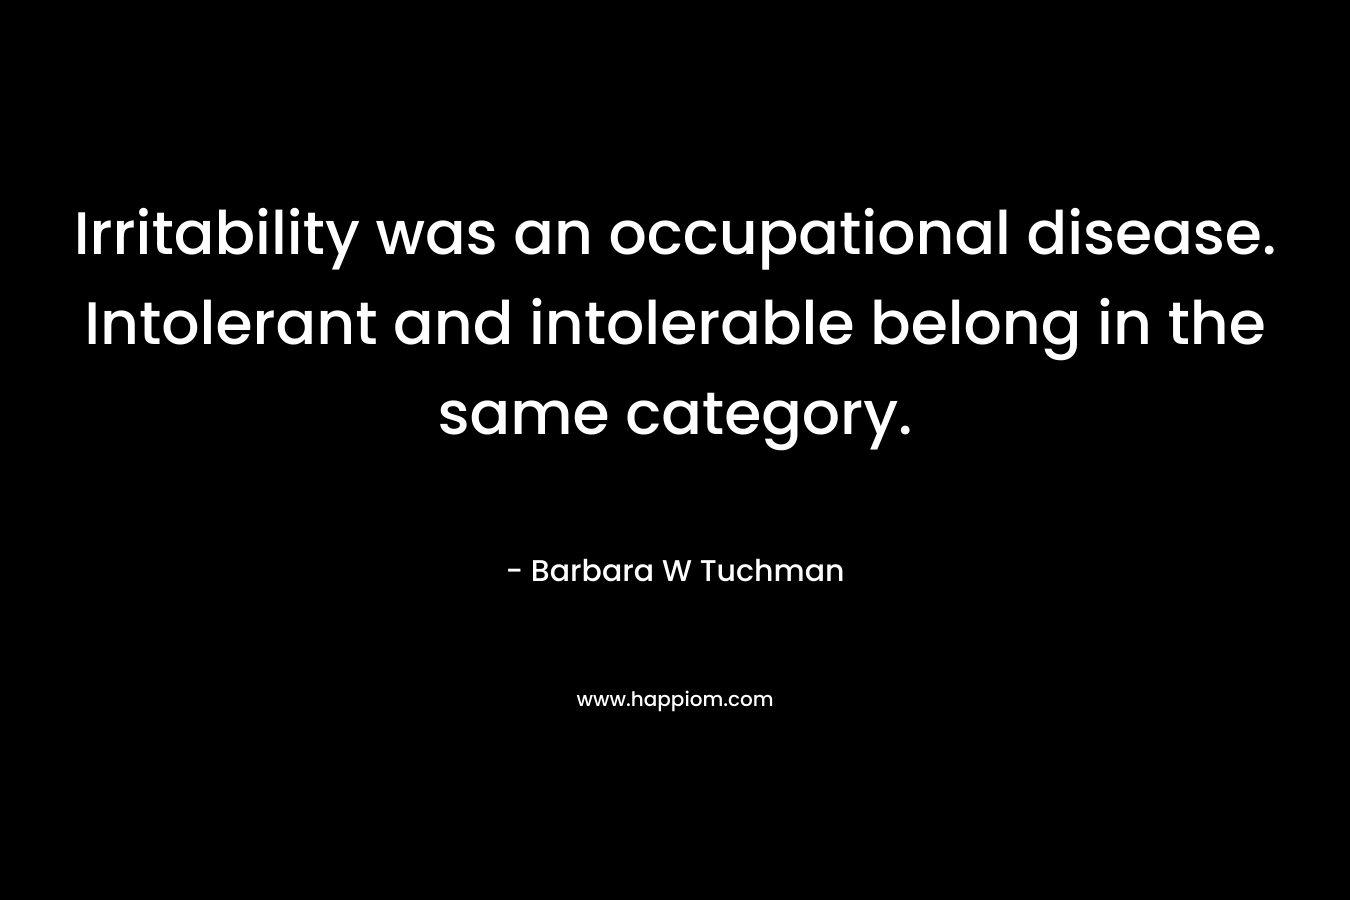 Irritability was an occupational disease. Intolerant and intolerable belong in the same category.